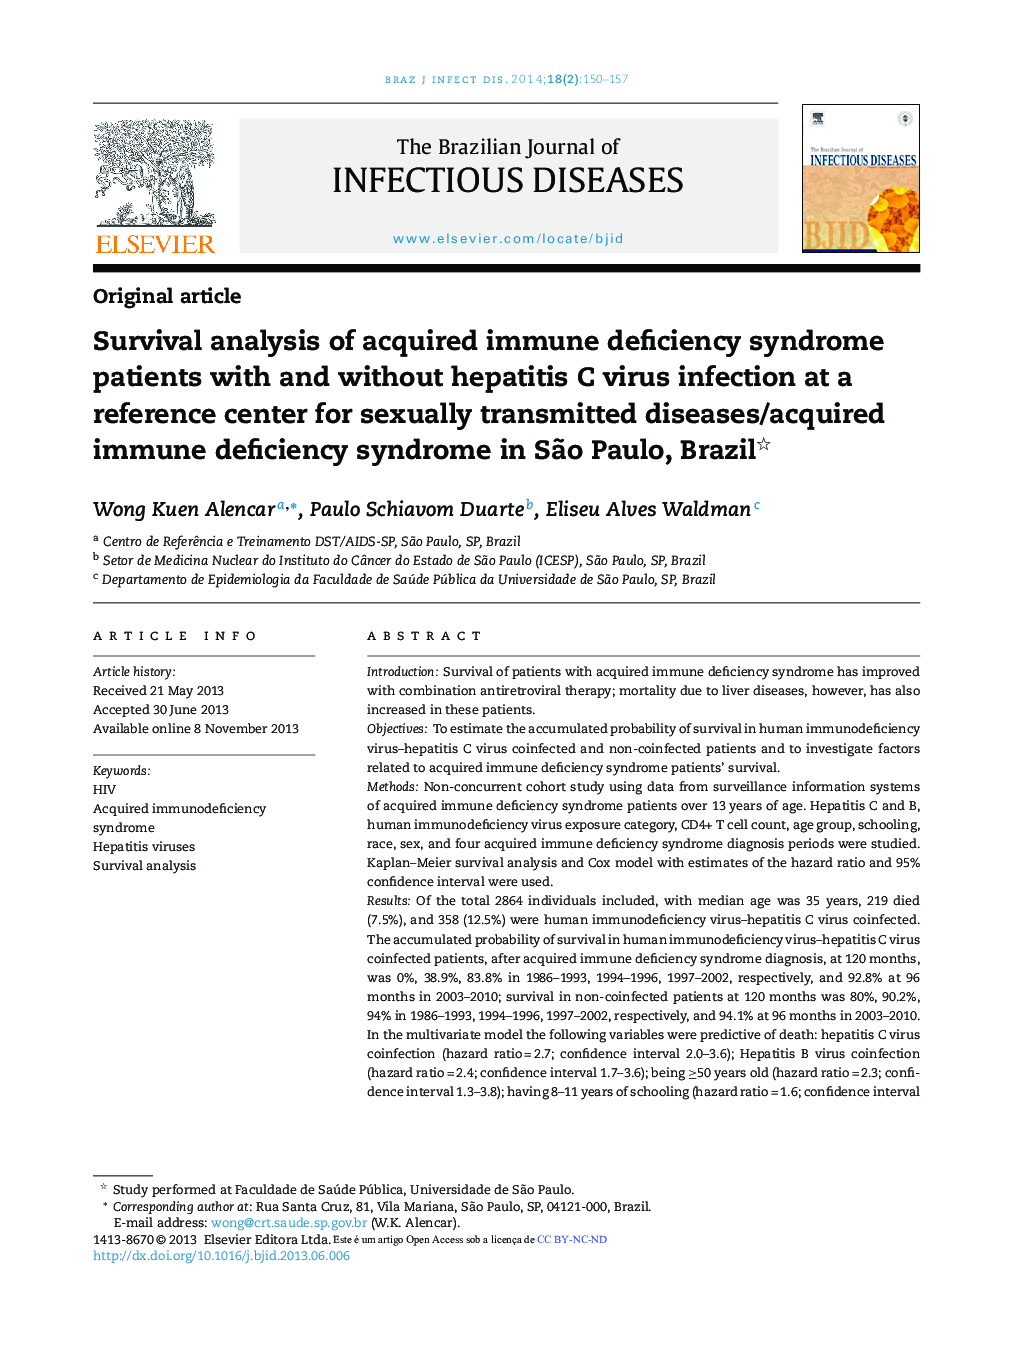 Survival analysis of acquired immune deficiency syndrome patients with and without hepatitis C virus infection at a reference center for sexually transmitted diseases/acquired immune deficiency syndrome in São Paulo, Brazil 